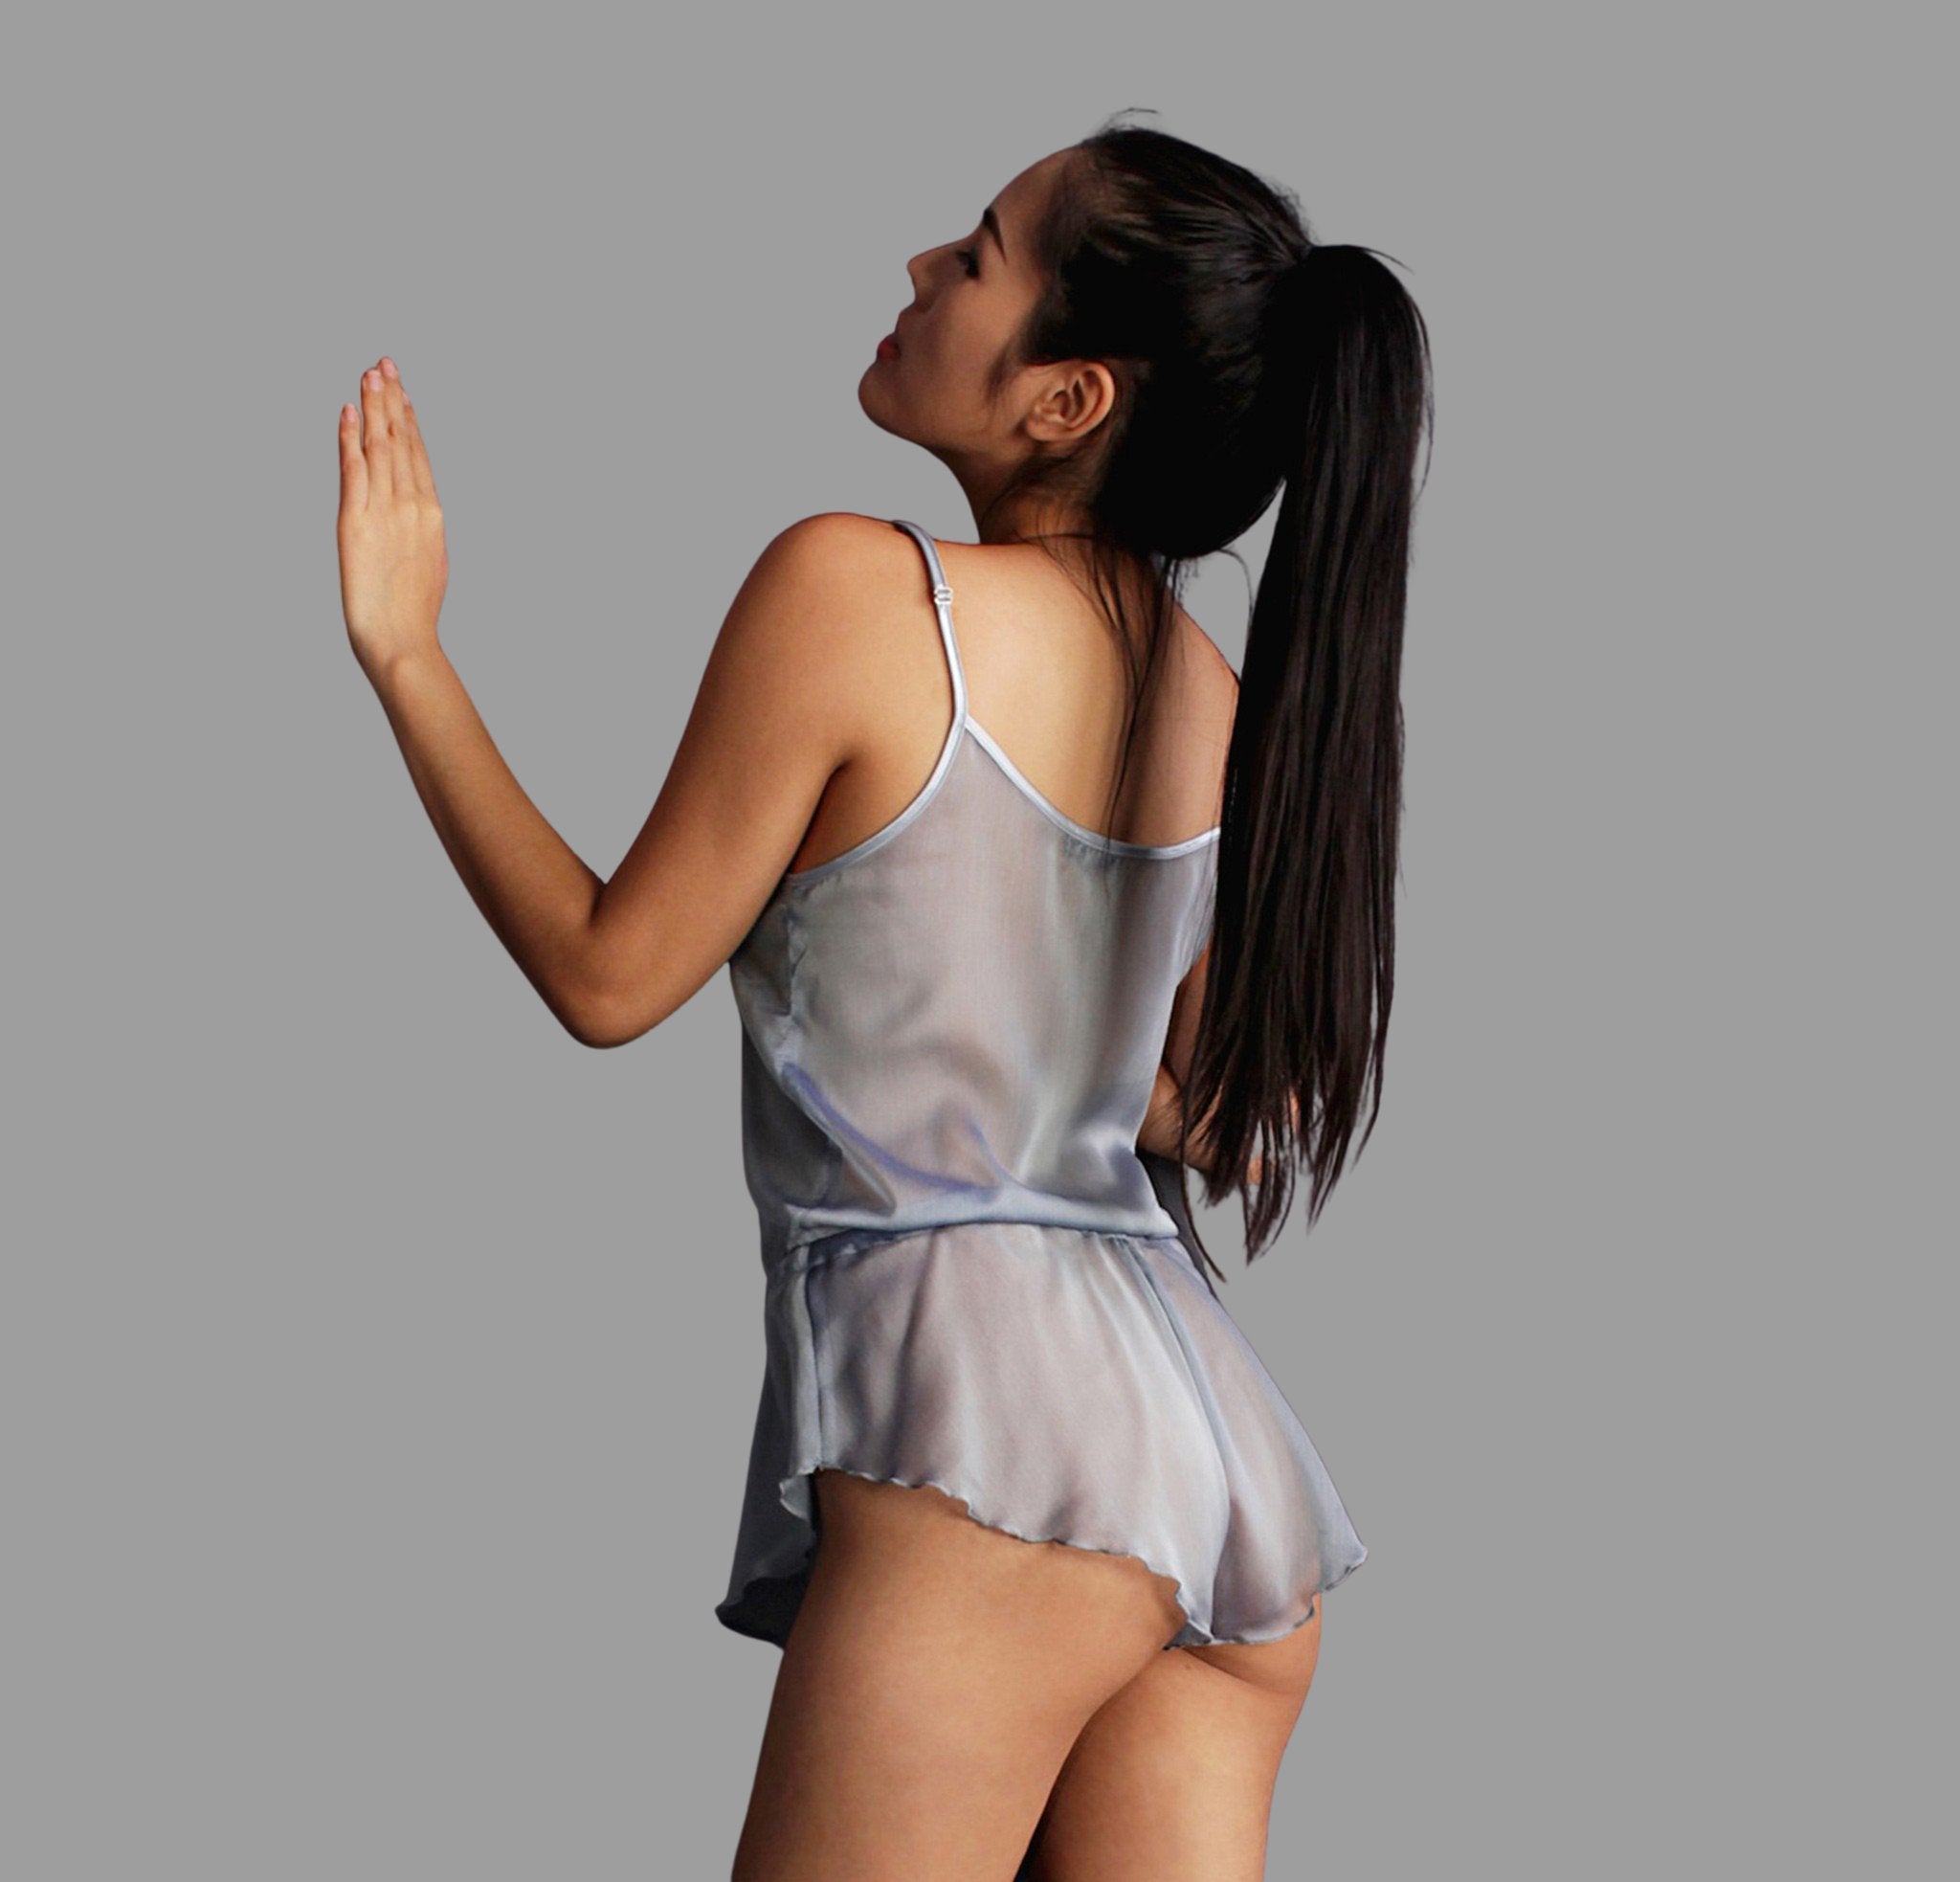 Sheer lingerie baby blue teddy playsuit sexy see through nightwear loungewear hand made by Ange Dechu - Ange Déchu